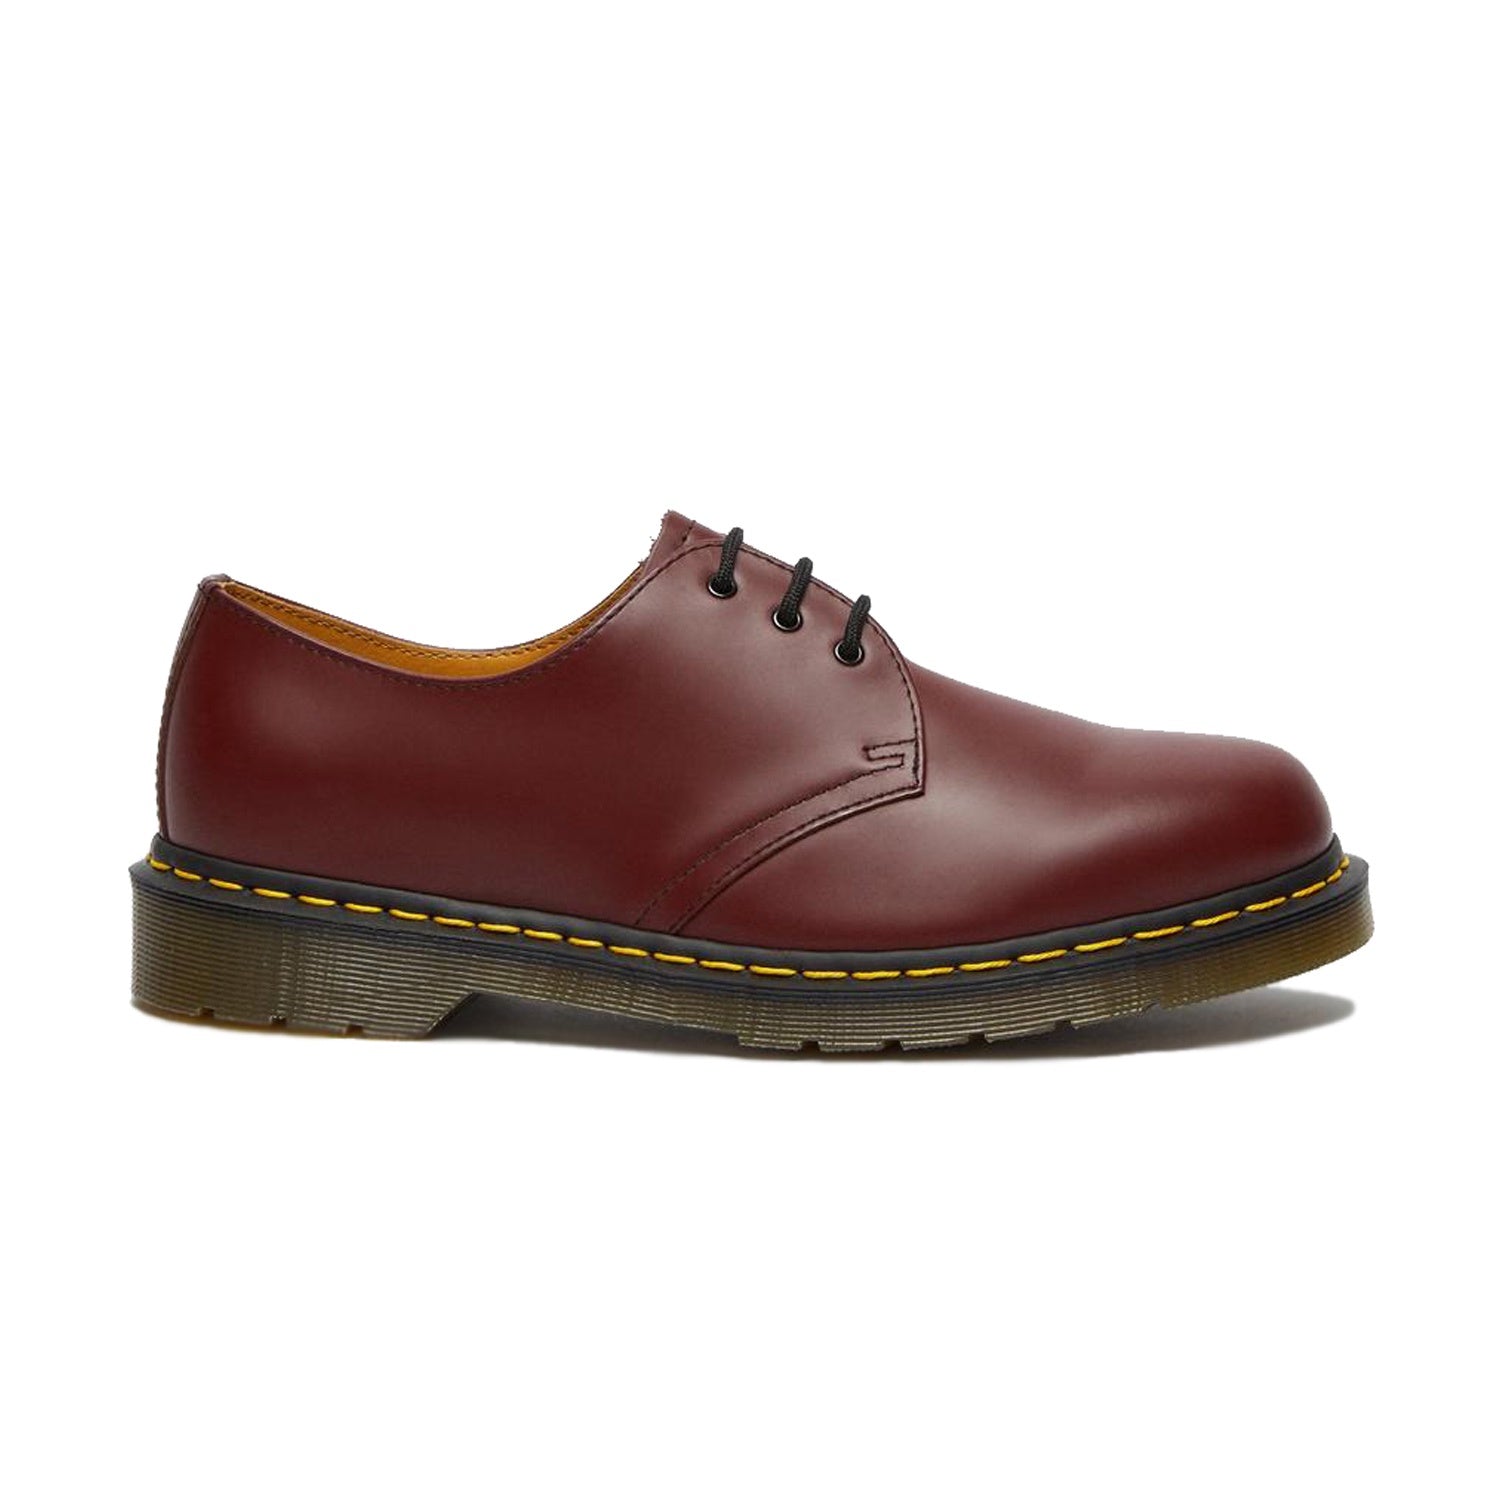 Dr. Martens 1461 Smooth Leather Shoes Cherry Red